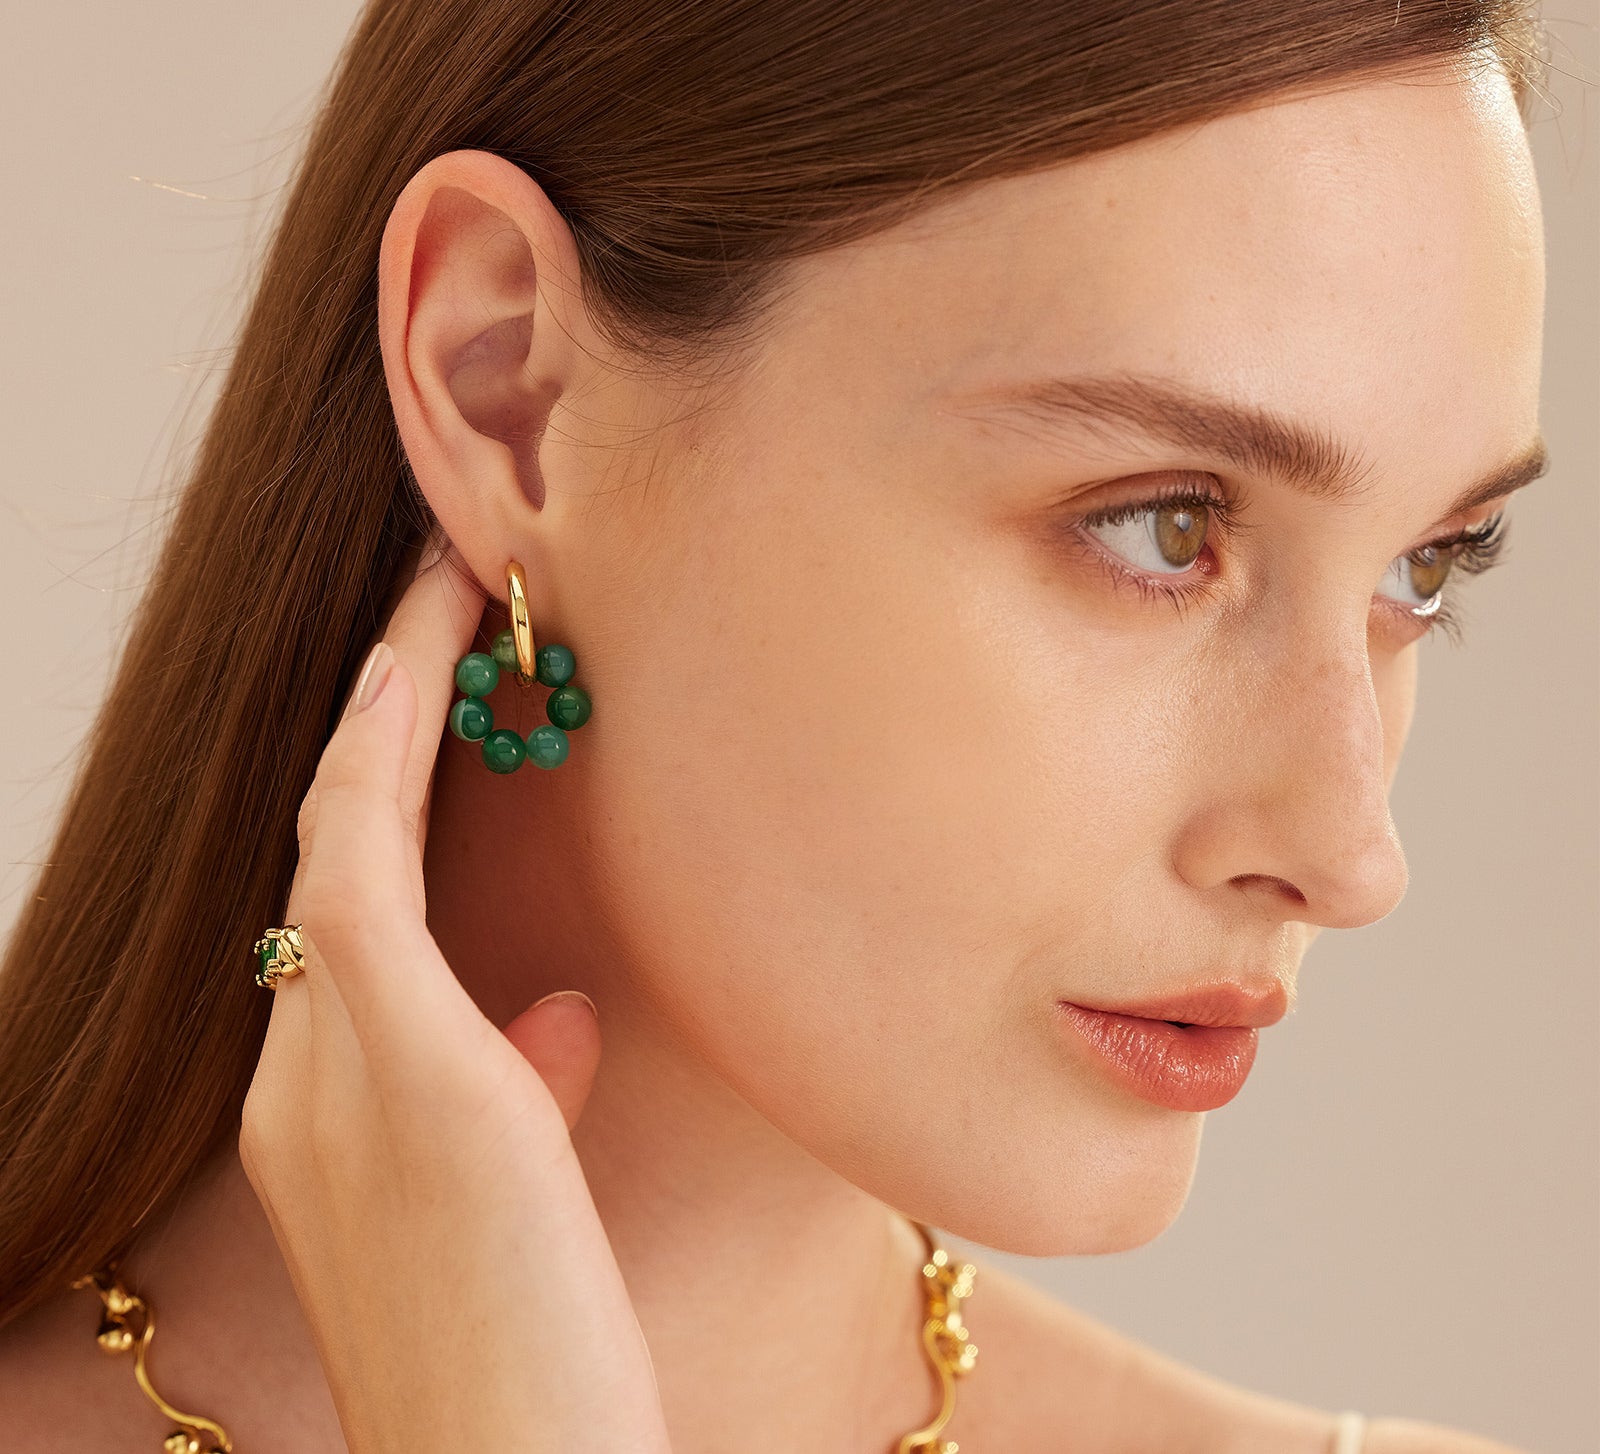  Medium Agate Hoop Earrings, featuring the charming allure of agate stones, these medium-sized hoops add a unique and natural element to your ear jewelry collection